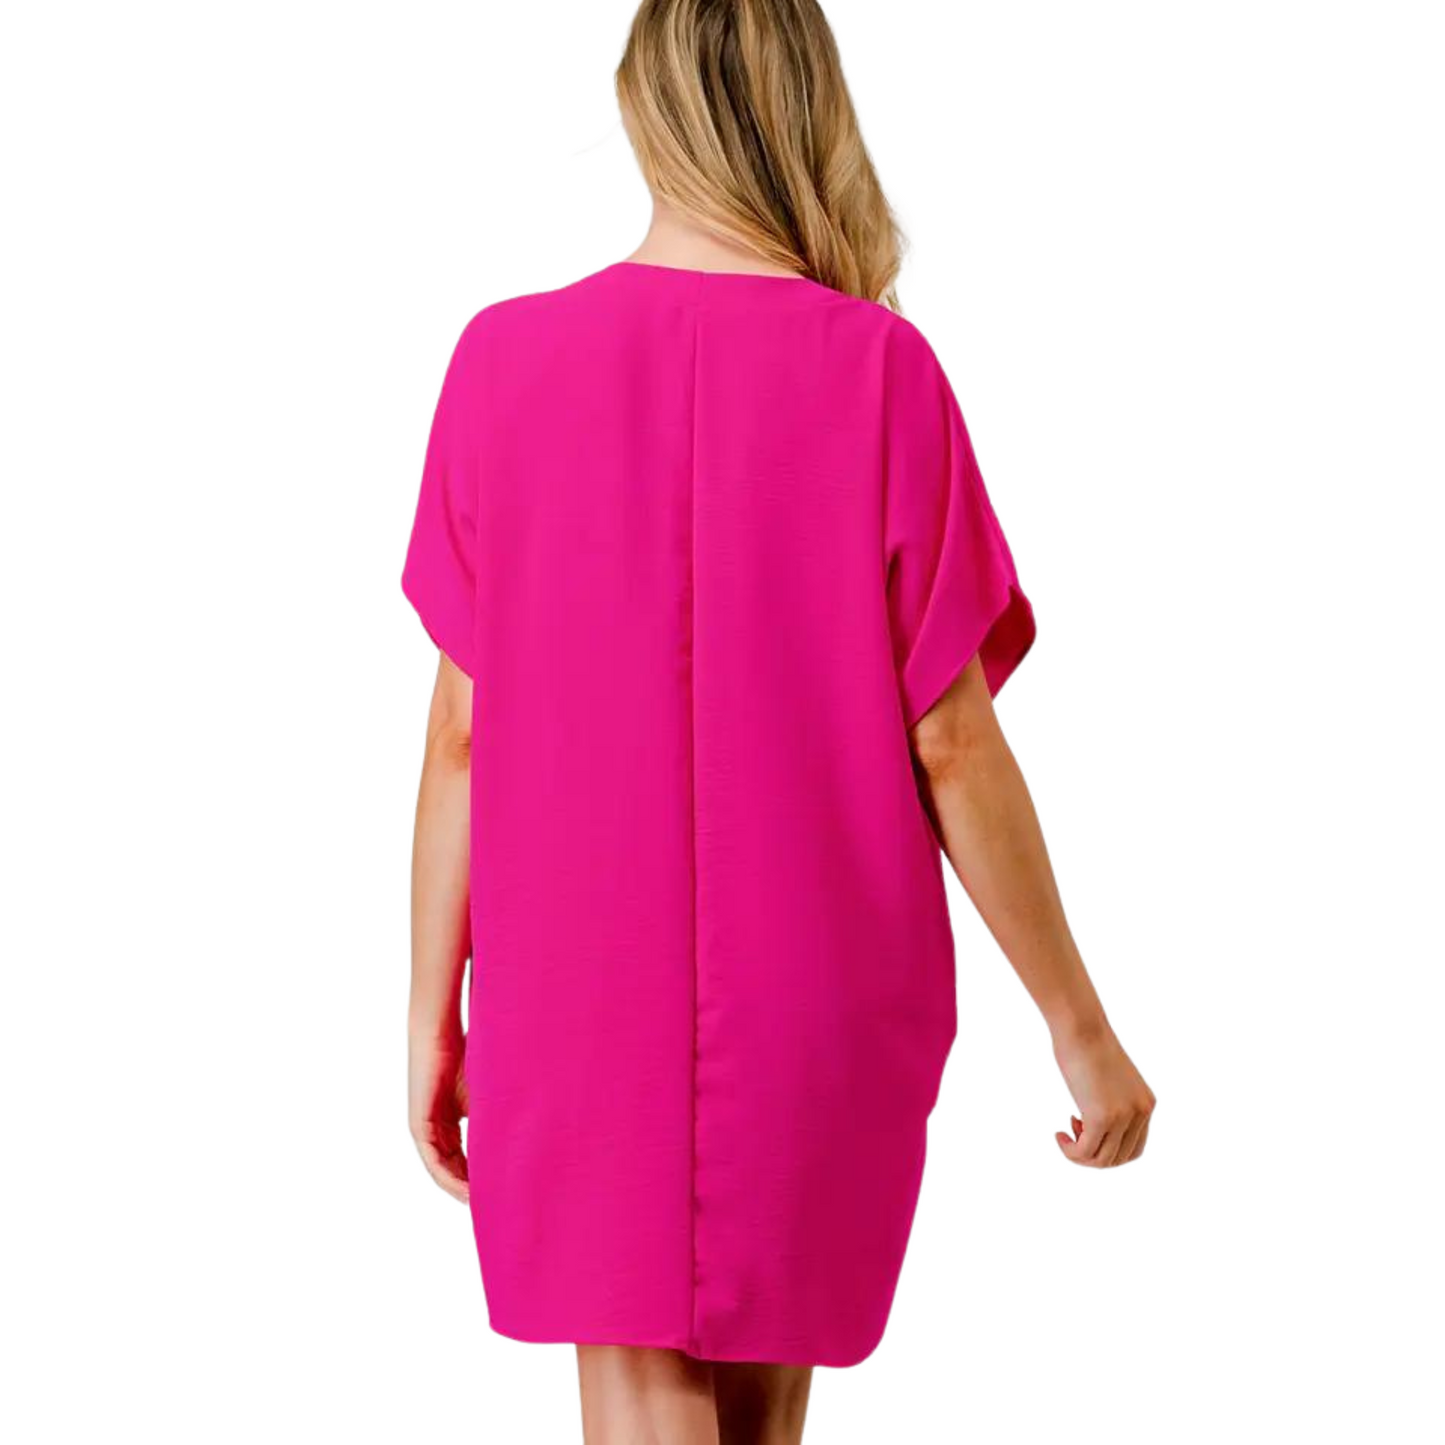 Made from soft and breathable fabric, the Aria Short Sleeve Shift Dress is the perfect addition to your wardrobe. The hot pink color adds a bold touch, while the v-neck and short sleeves provide style and comfort. This mini dress is a must-have for any fashion-forward individual.